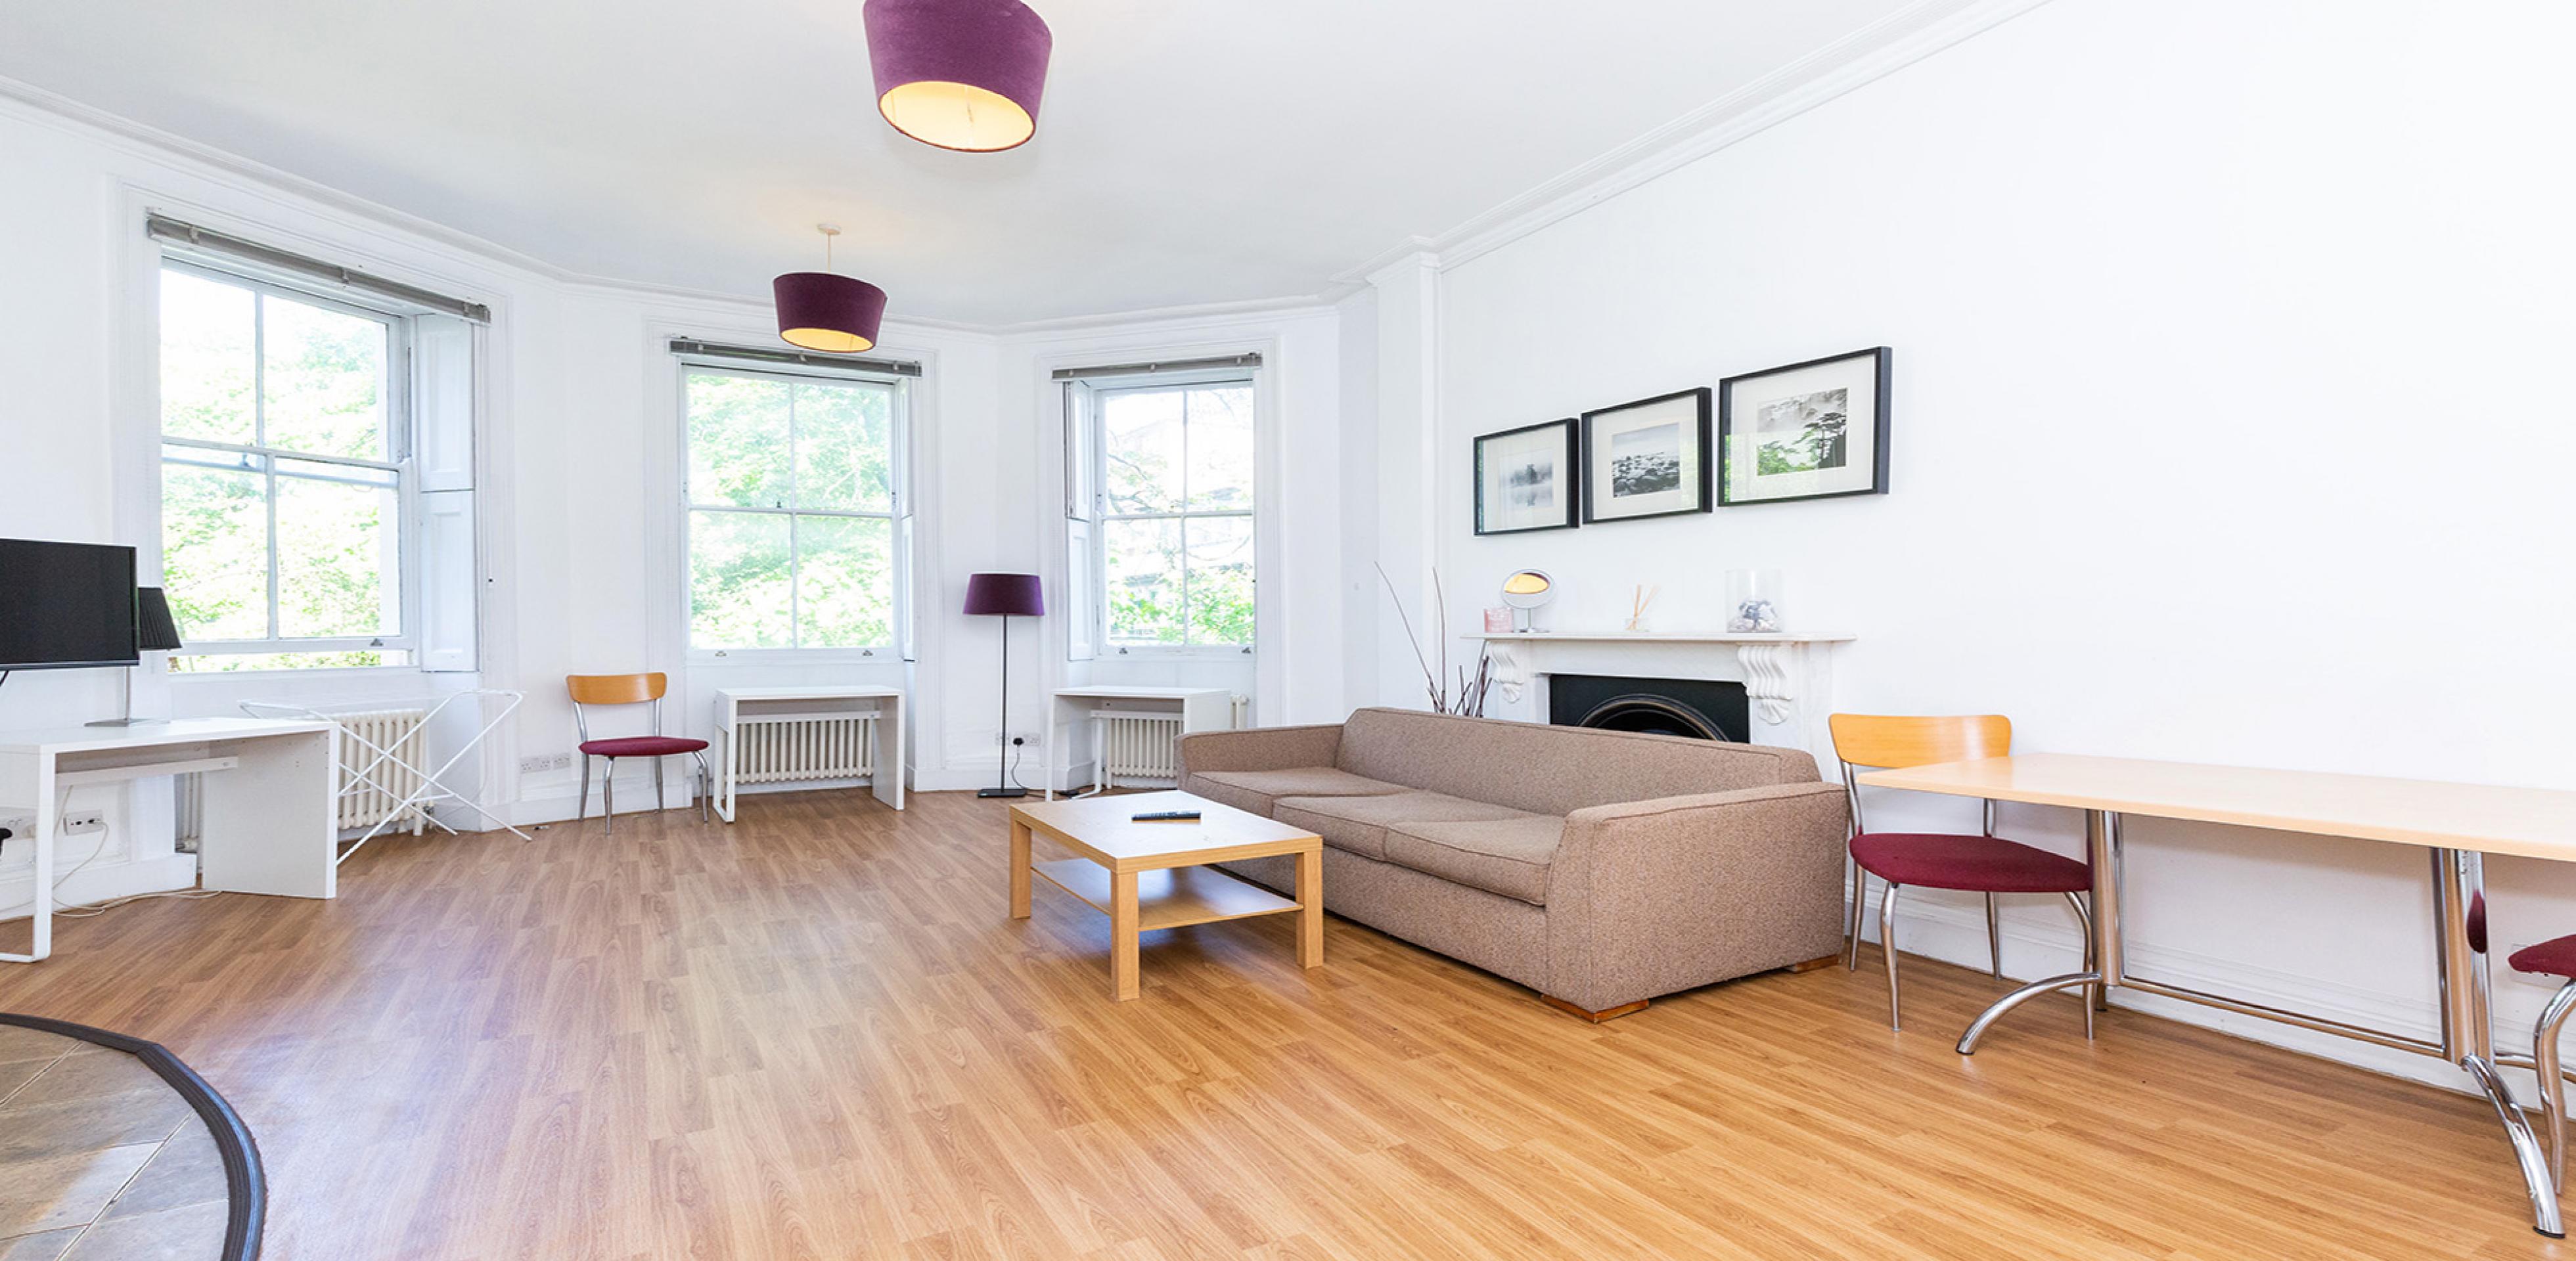 			NEW INSTRUCTION!, 1 Bedroom, 1 bath, 1 reception Flat			 Bloomsbury Place, RUSSELL SQUARE WC1A